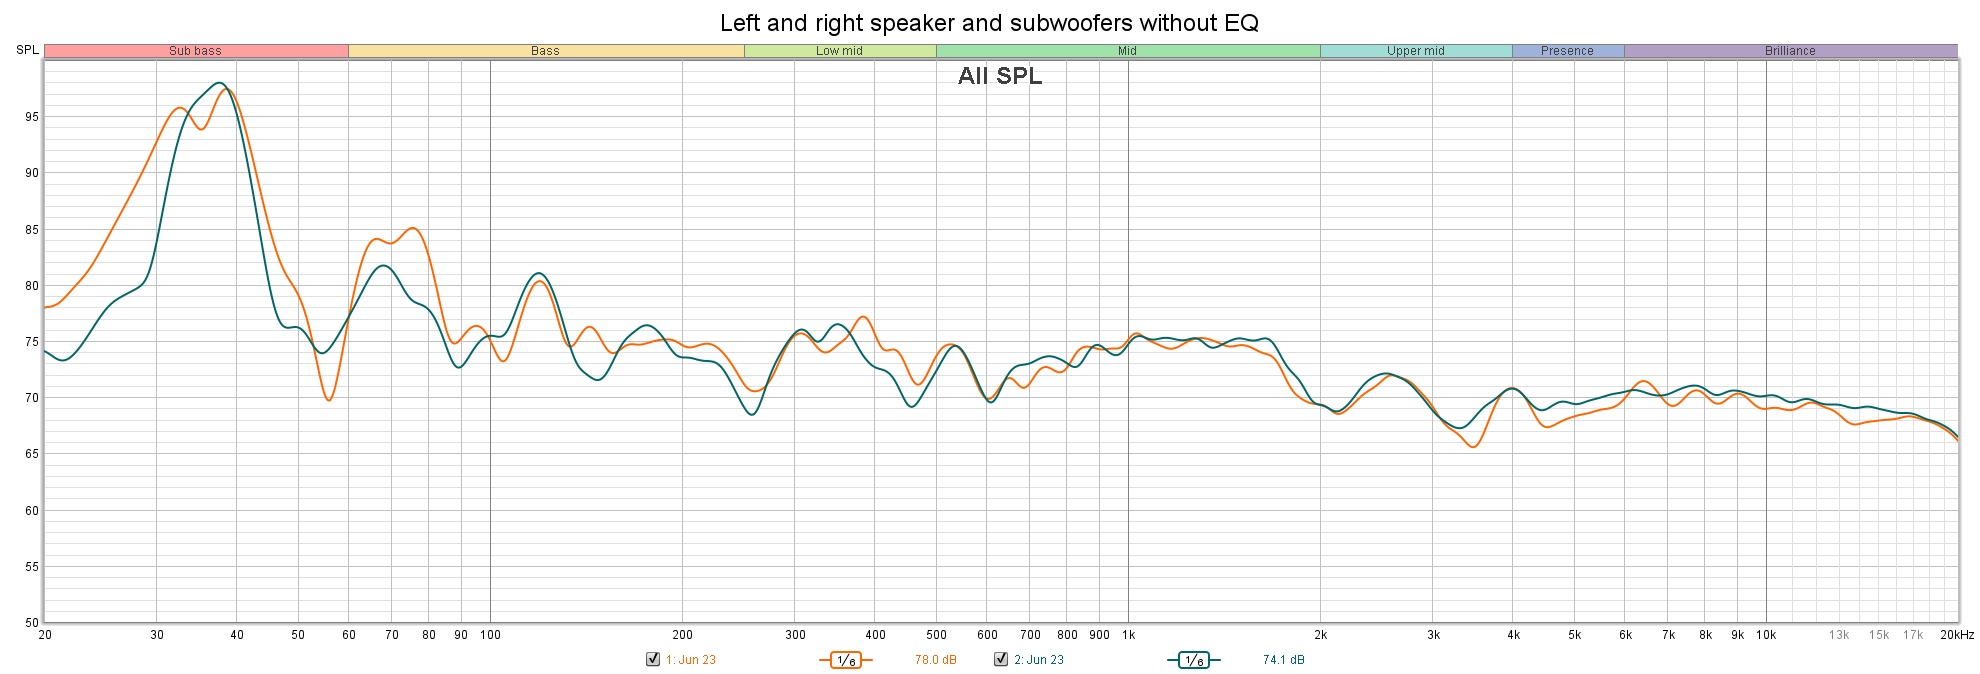 Left and right speaker and subwoofers without EQ.jpg